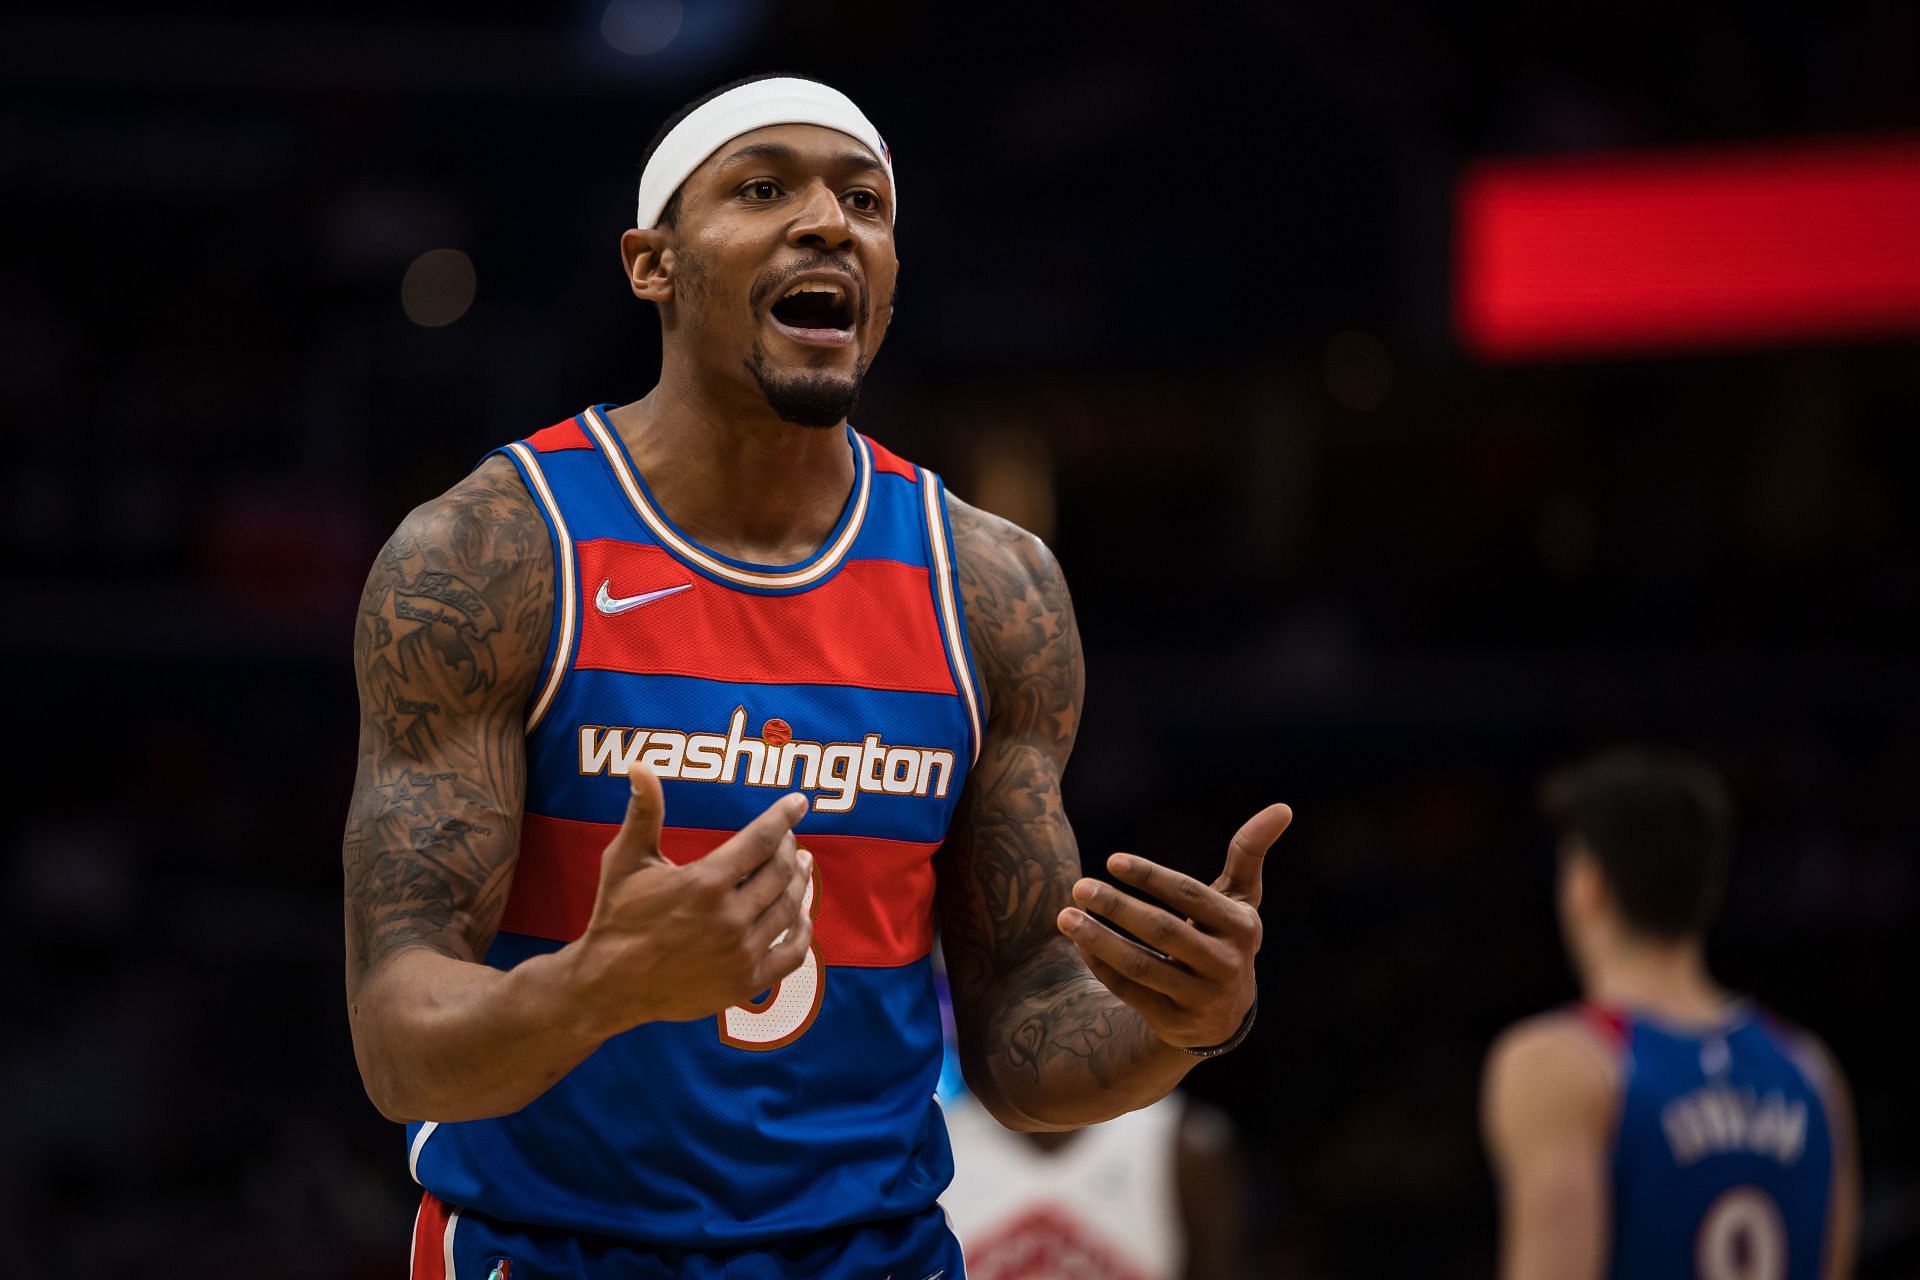 Bradley Beal of the Washington Wizards reacts during a game